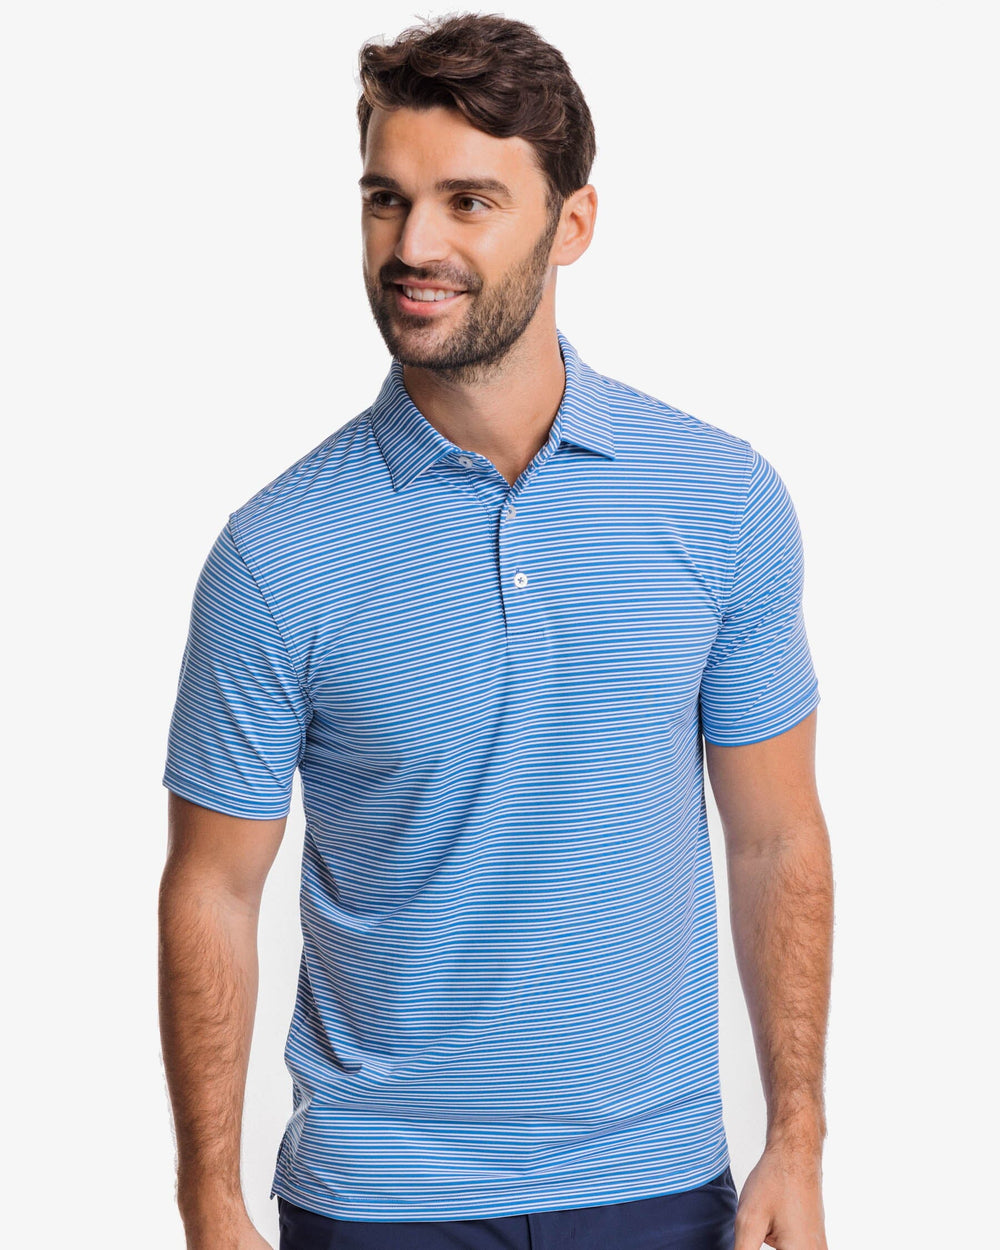 The front view of the Southern Tide brrr-eeze Millwood Stripe Performance Polo Shirt by Southern Tide - Atlantic Blue